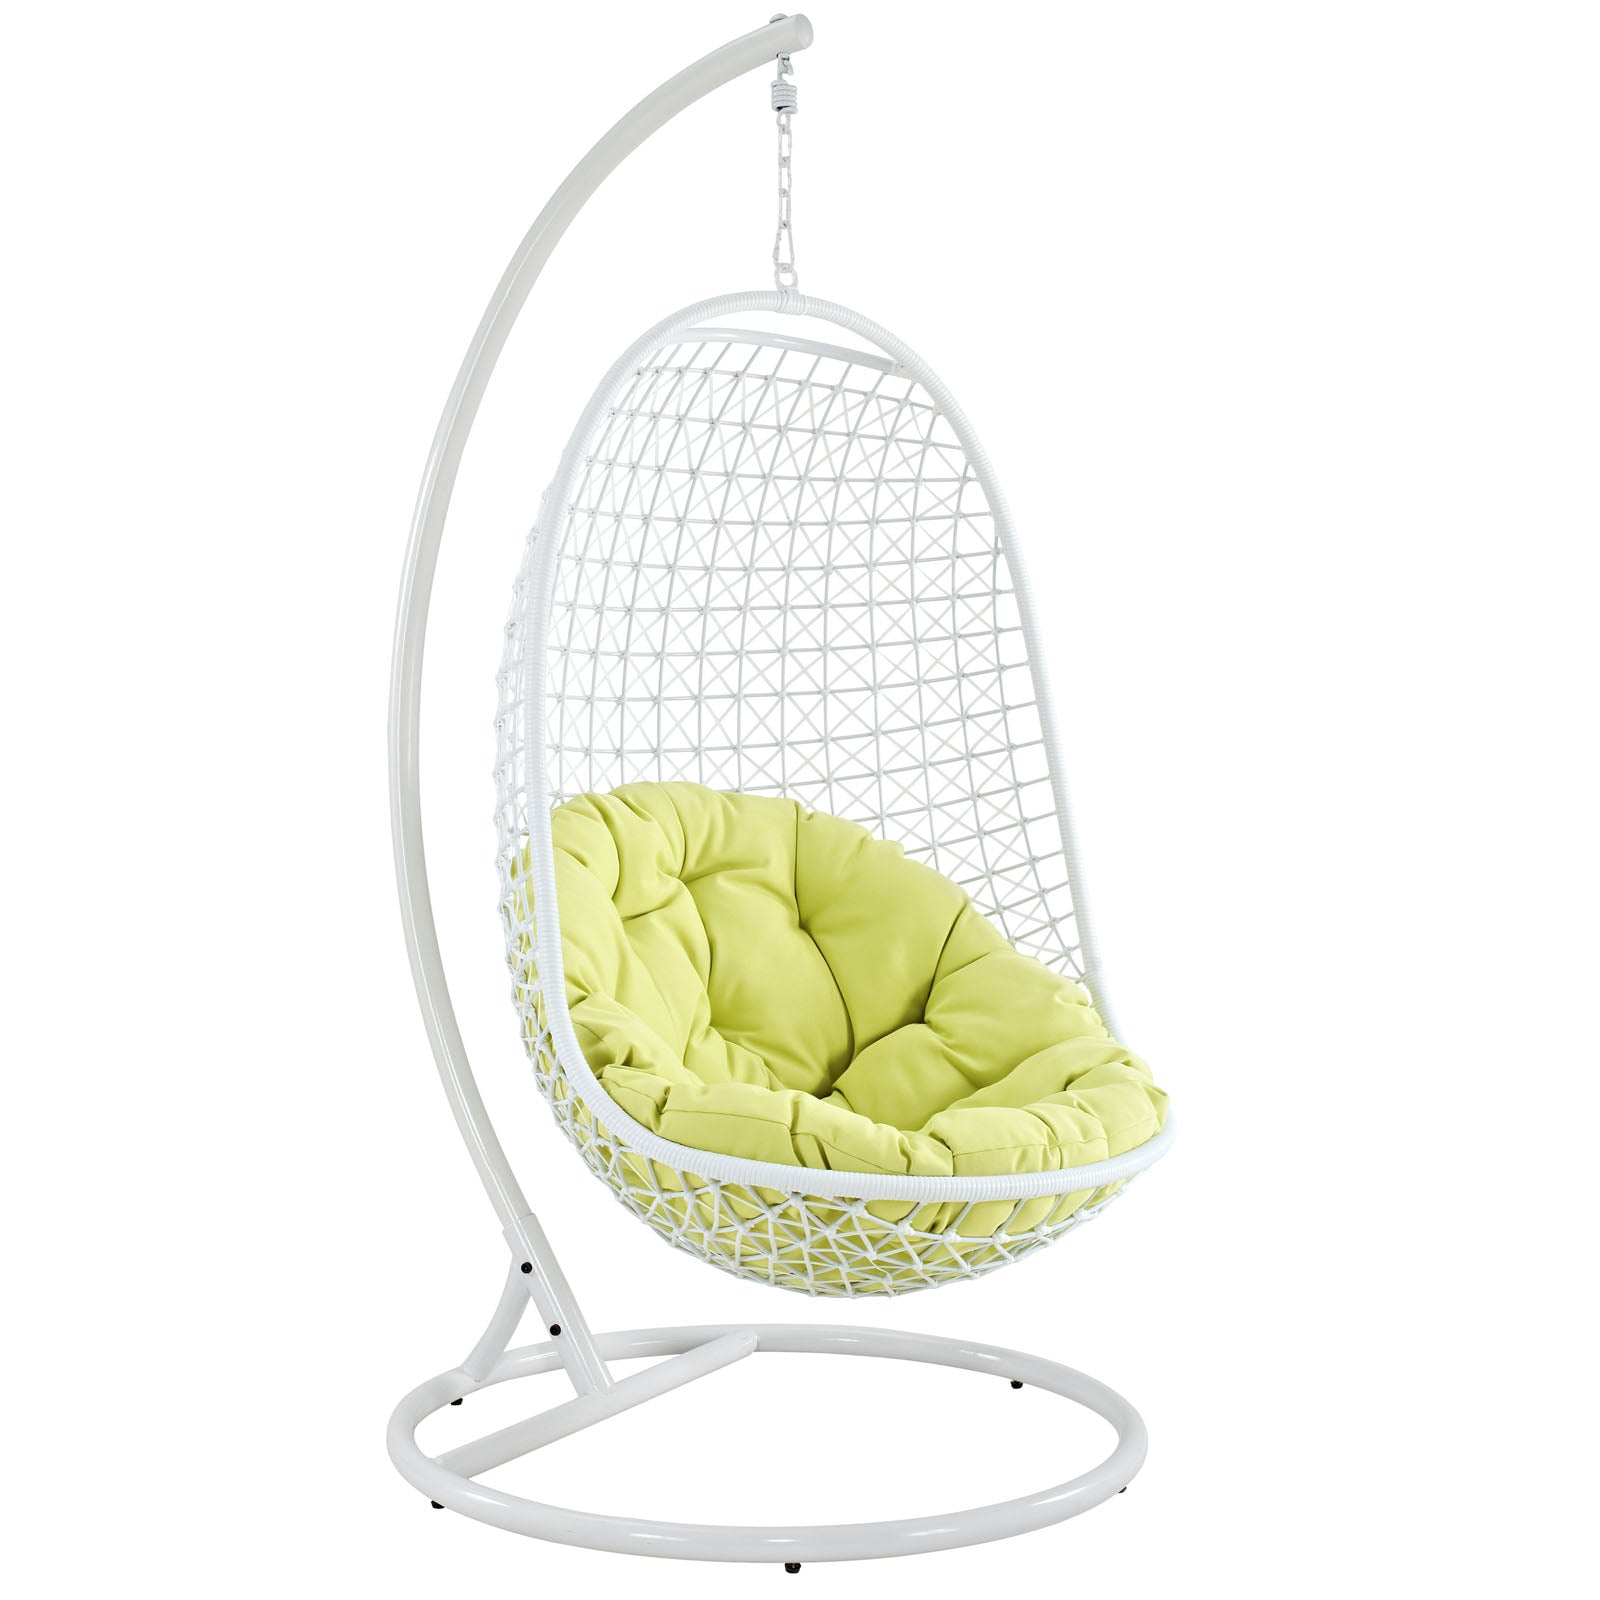 Modway Outdoor Swings - Encounter Swing Outdoor Lounge Chair White